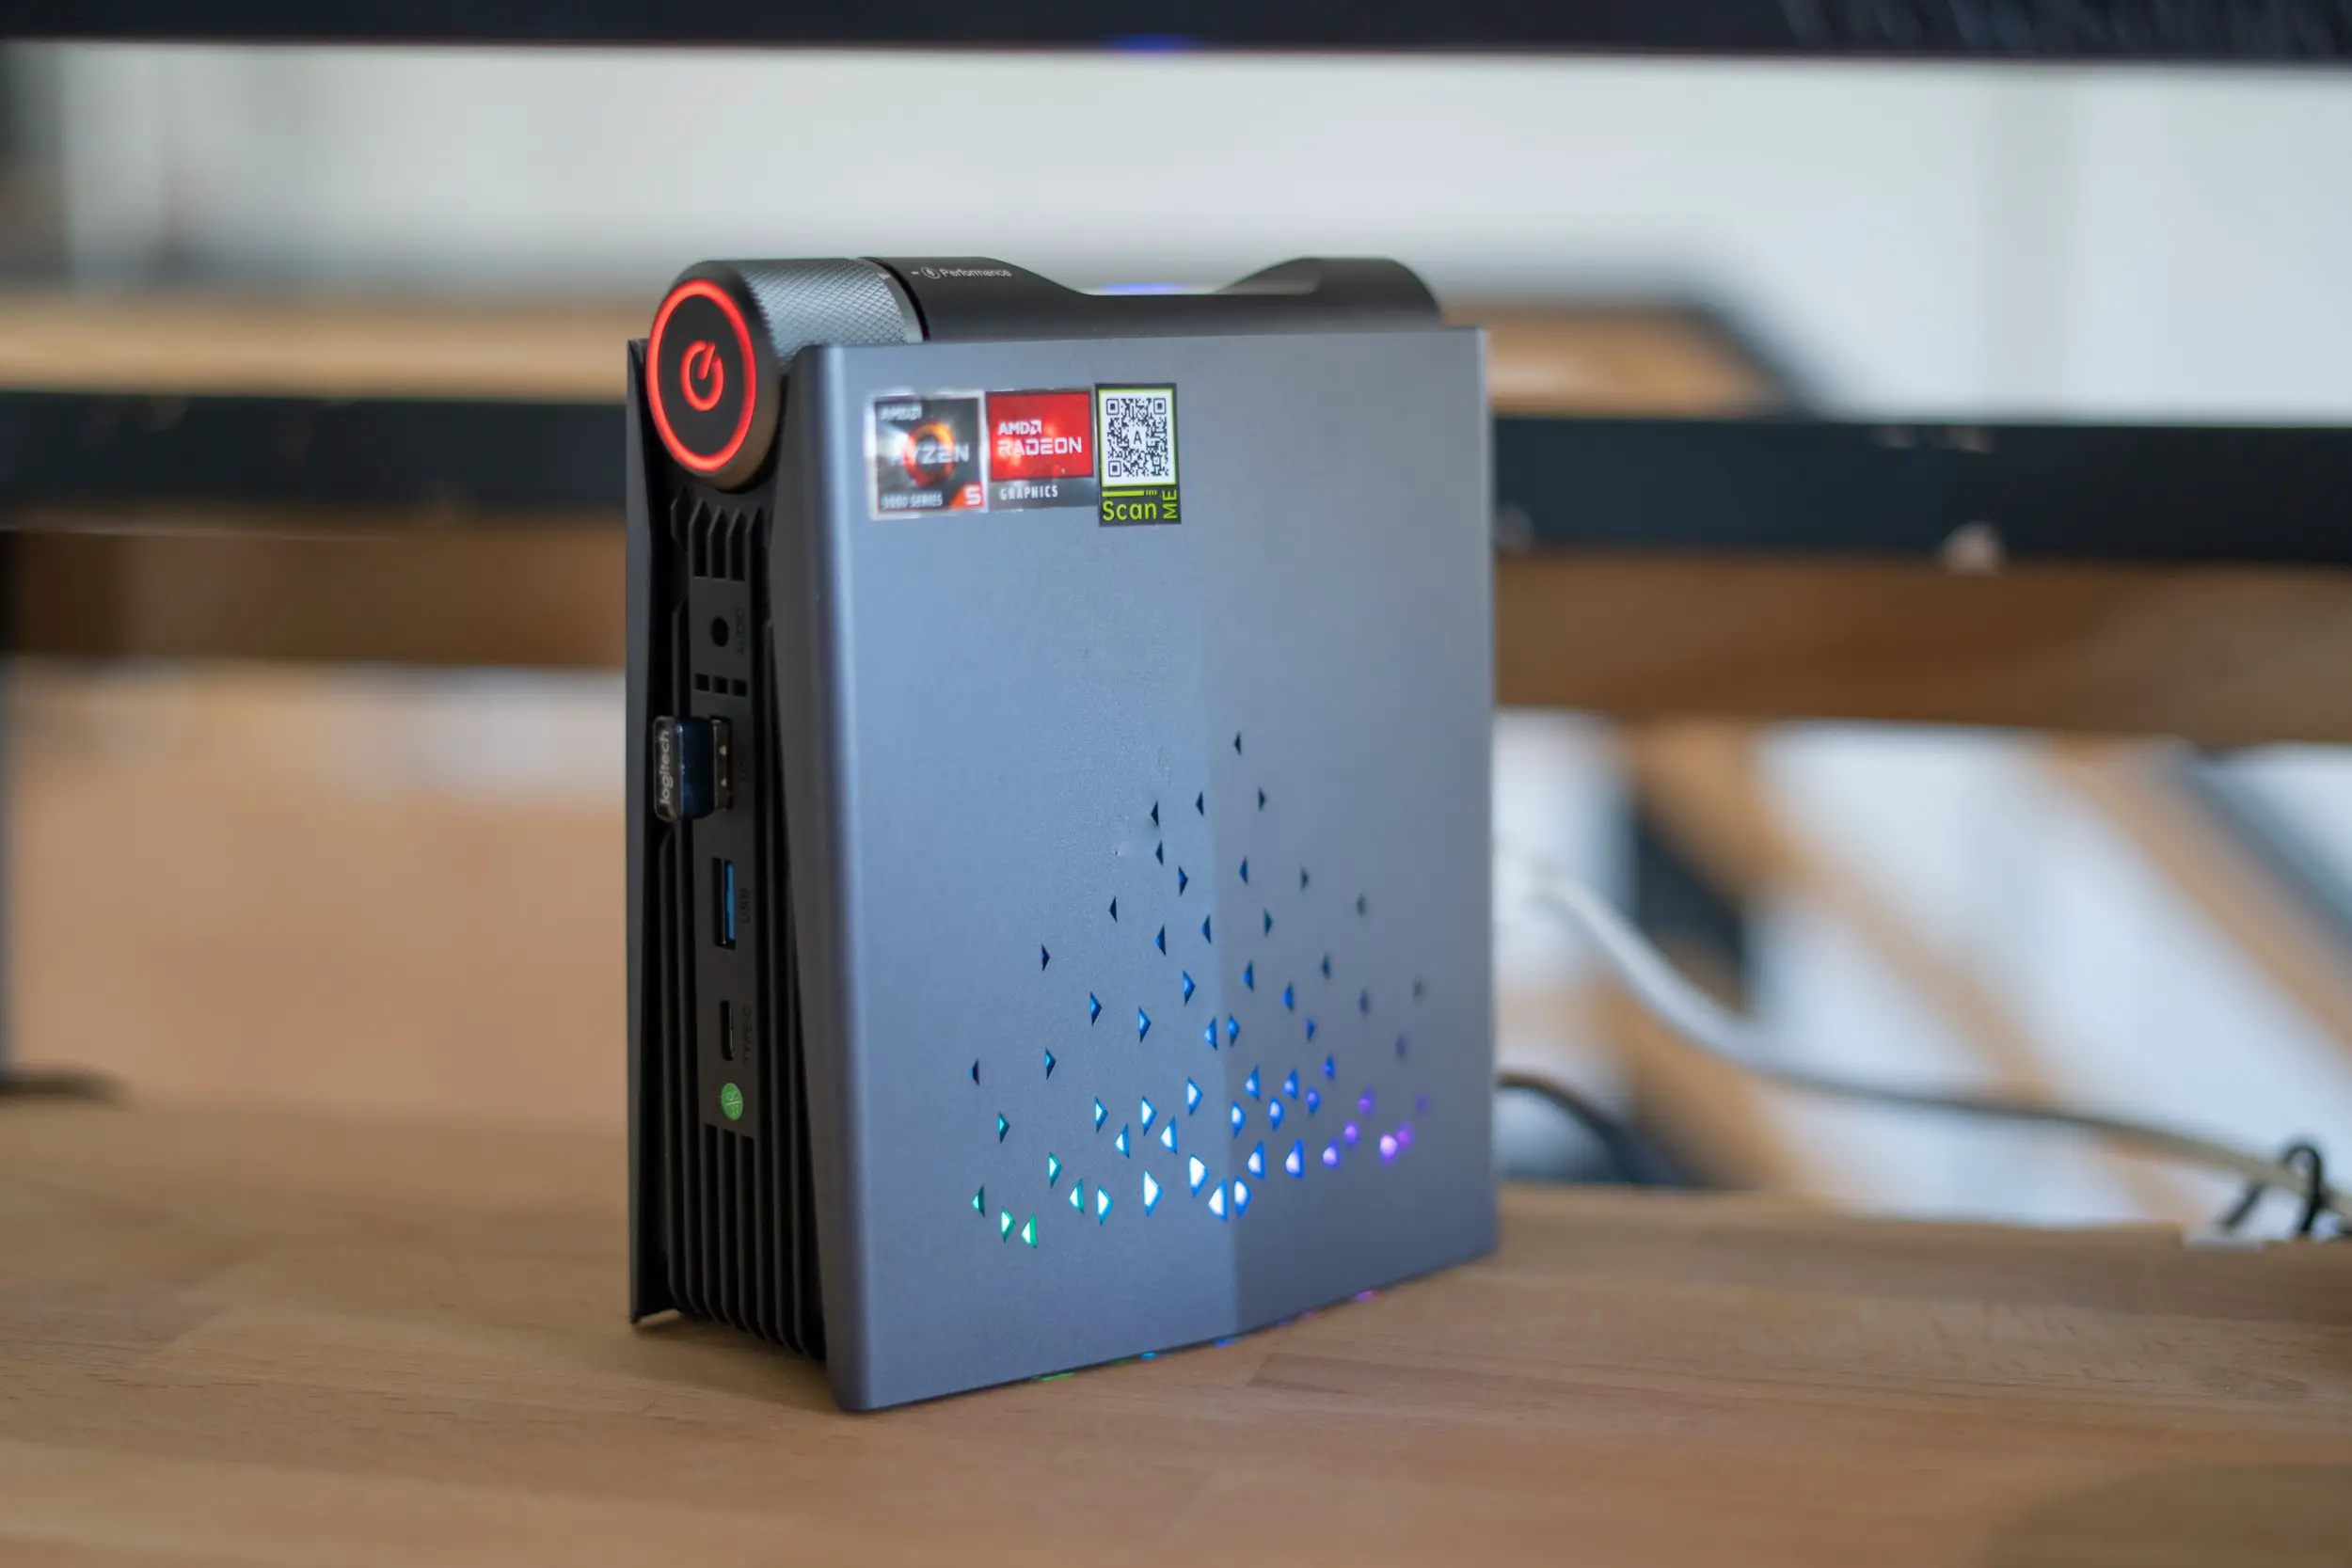 ACEMAGICIAN AMR5 mini gaming PC packs a ton of power - Phandroid